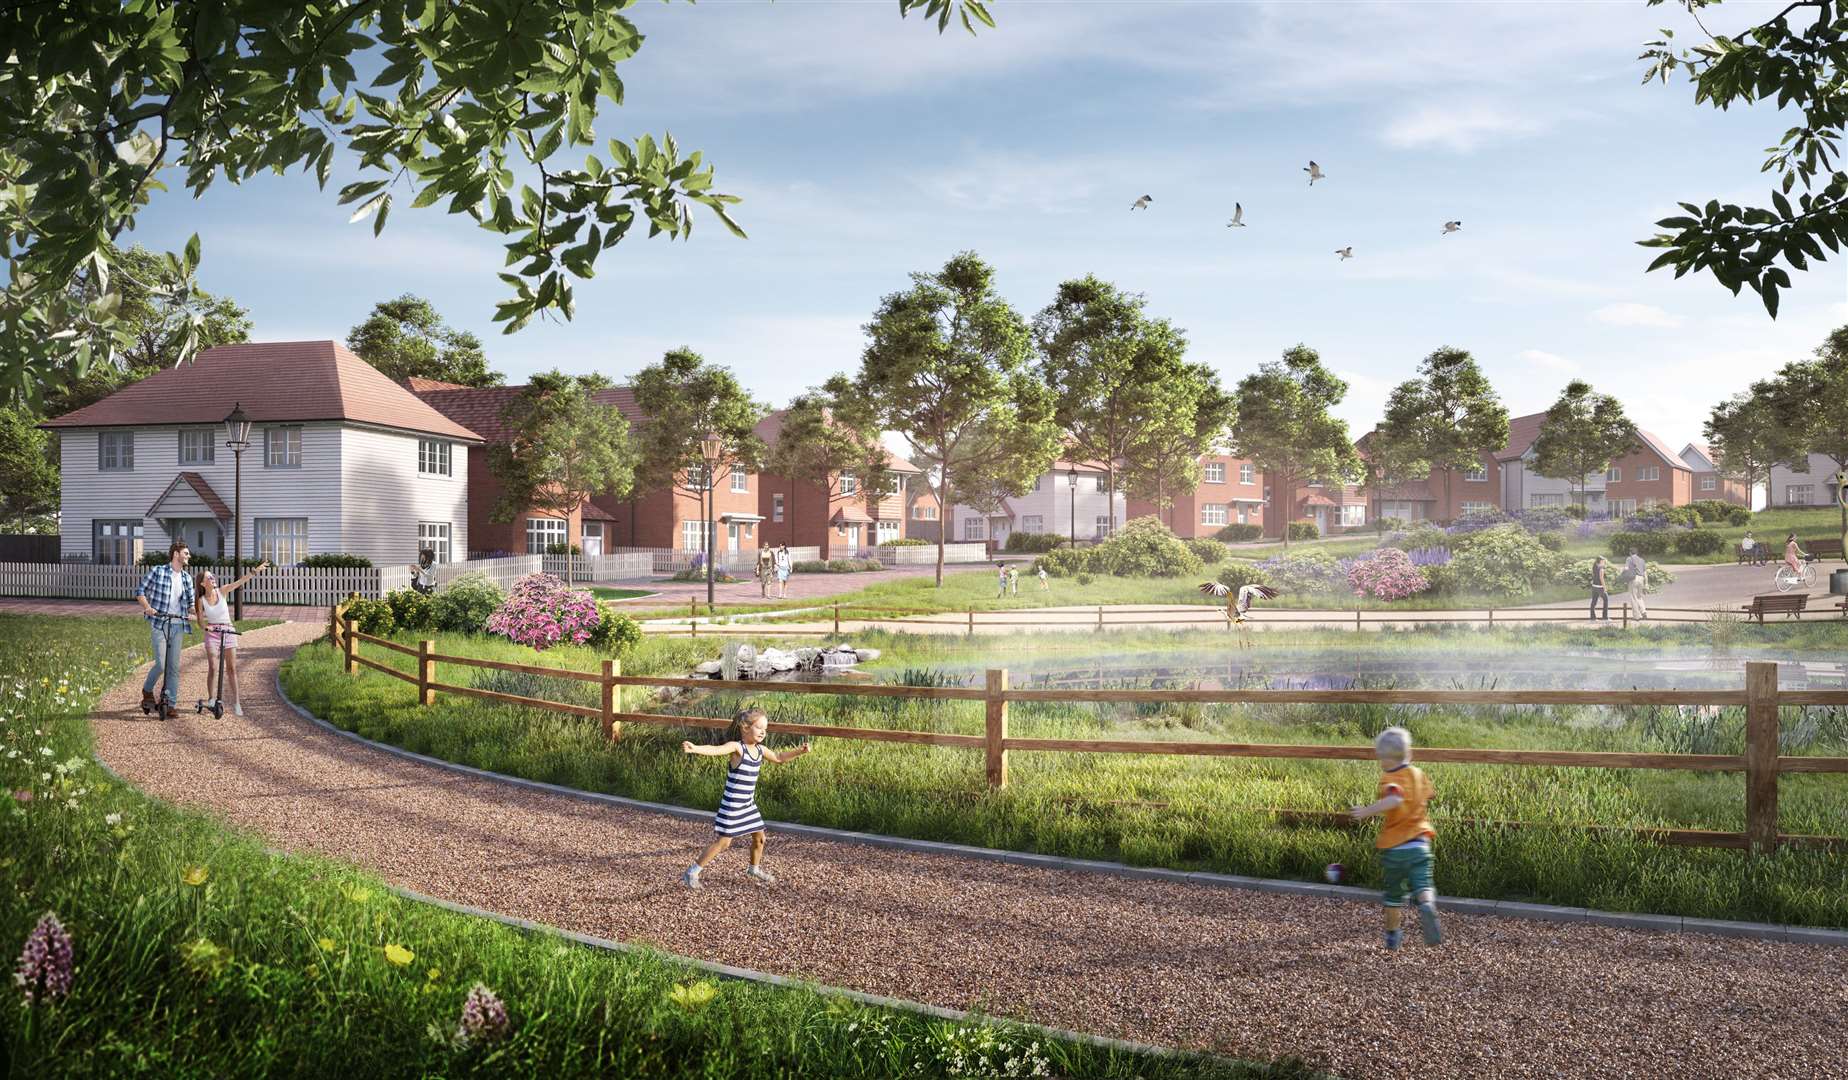 How the Large Burton development could look